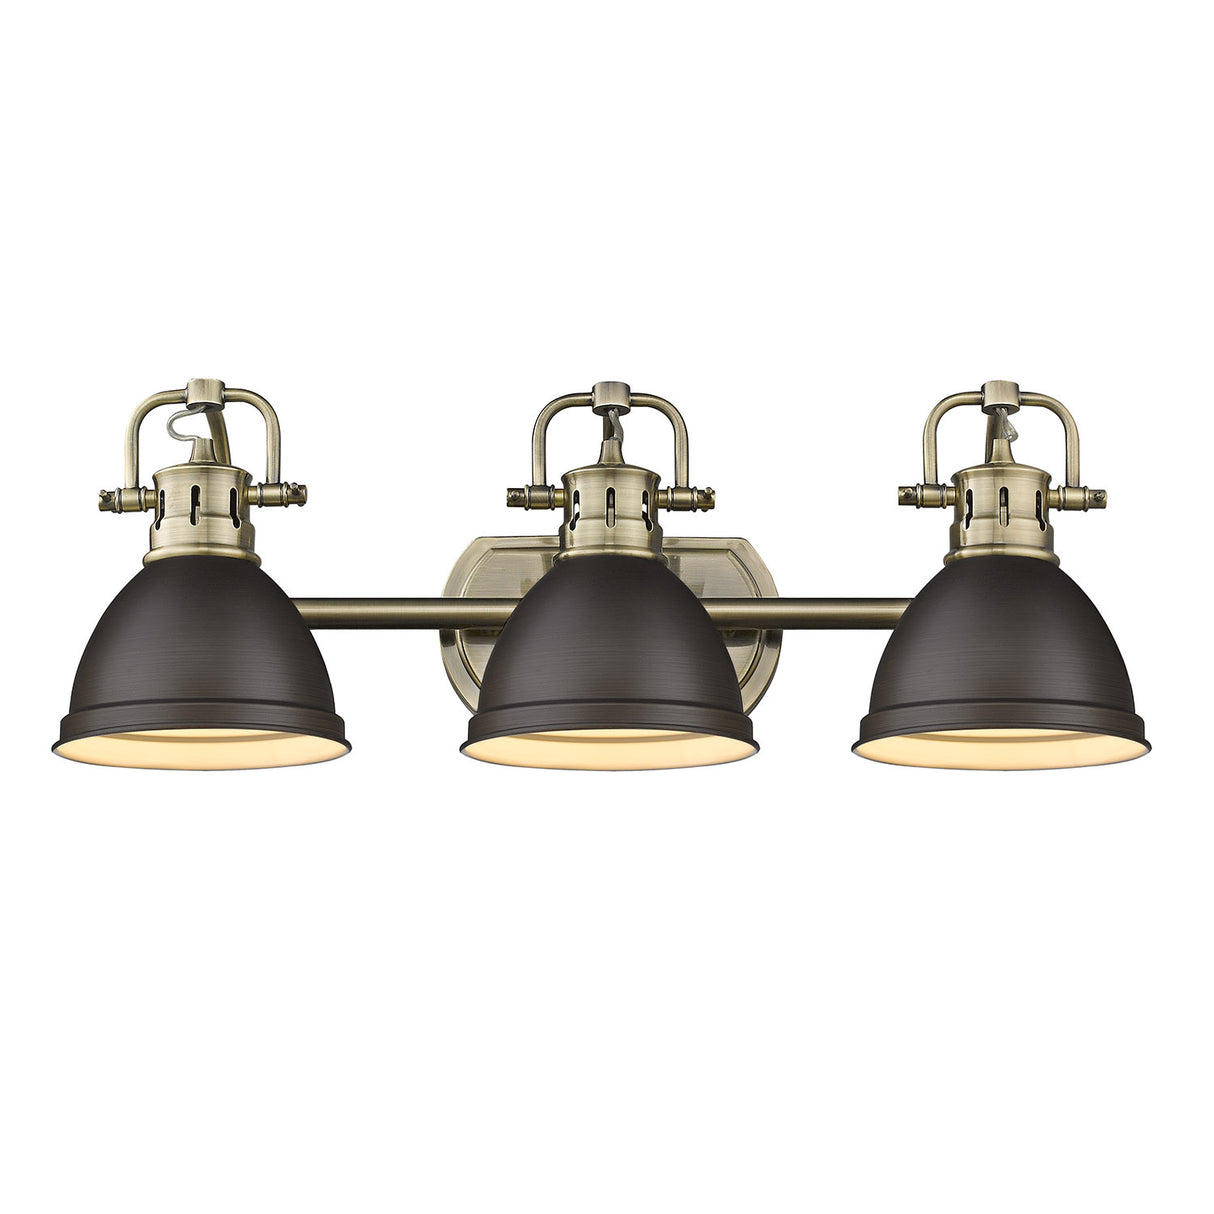 Duncan 3 Light Bath Vanity in Aged Brass with a Rubbed Bronze Shade